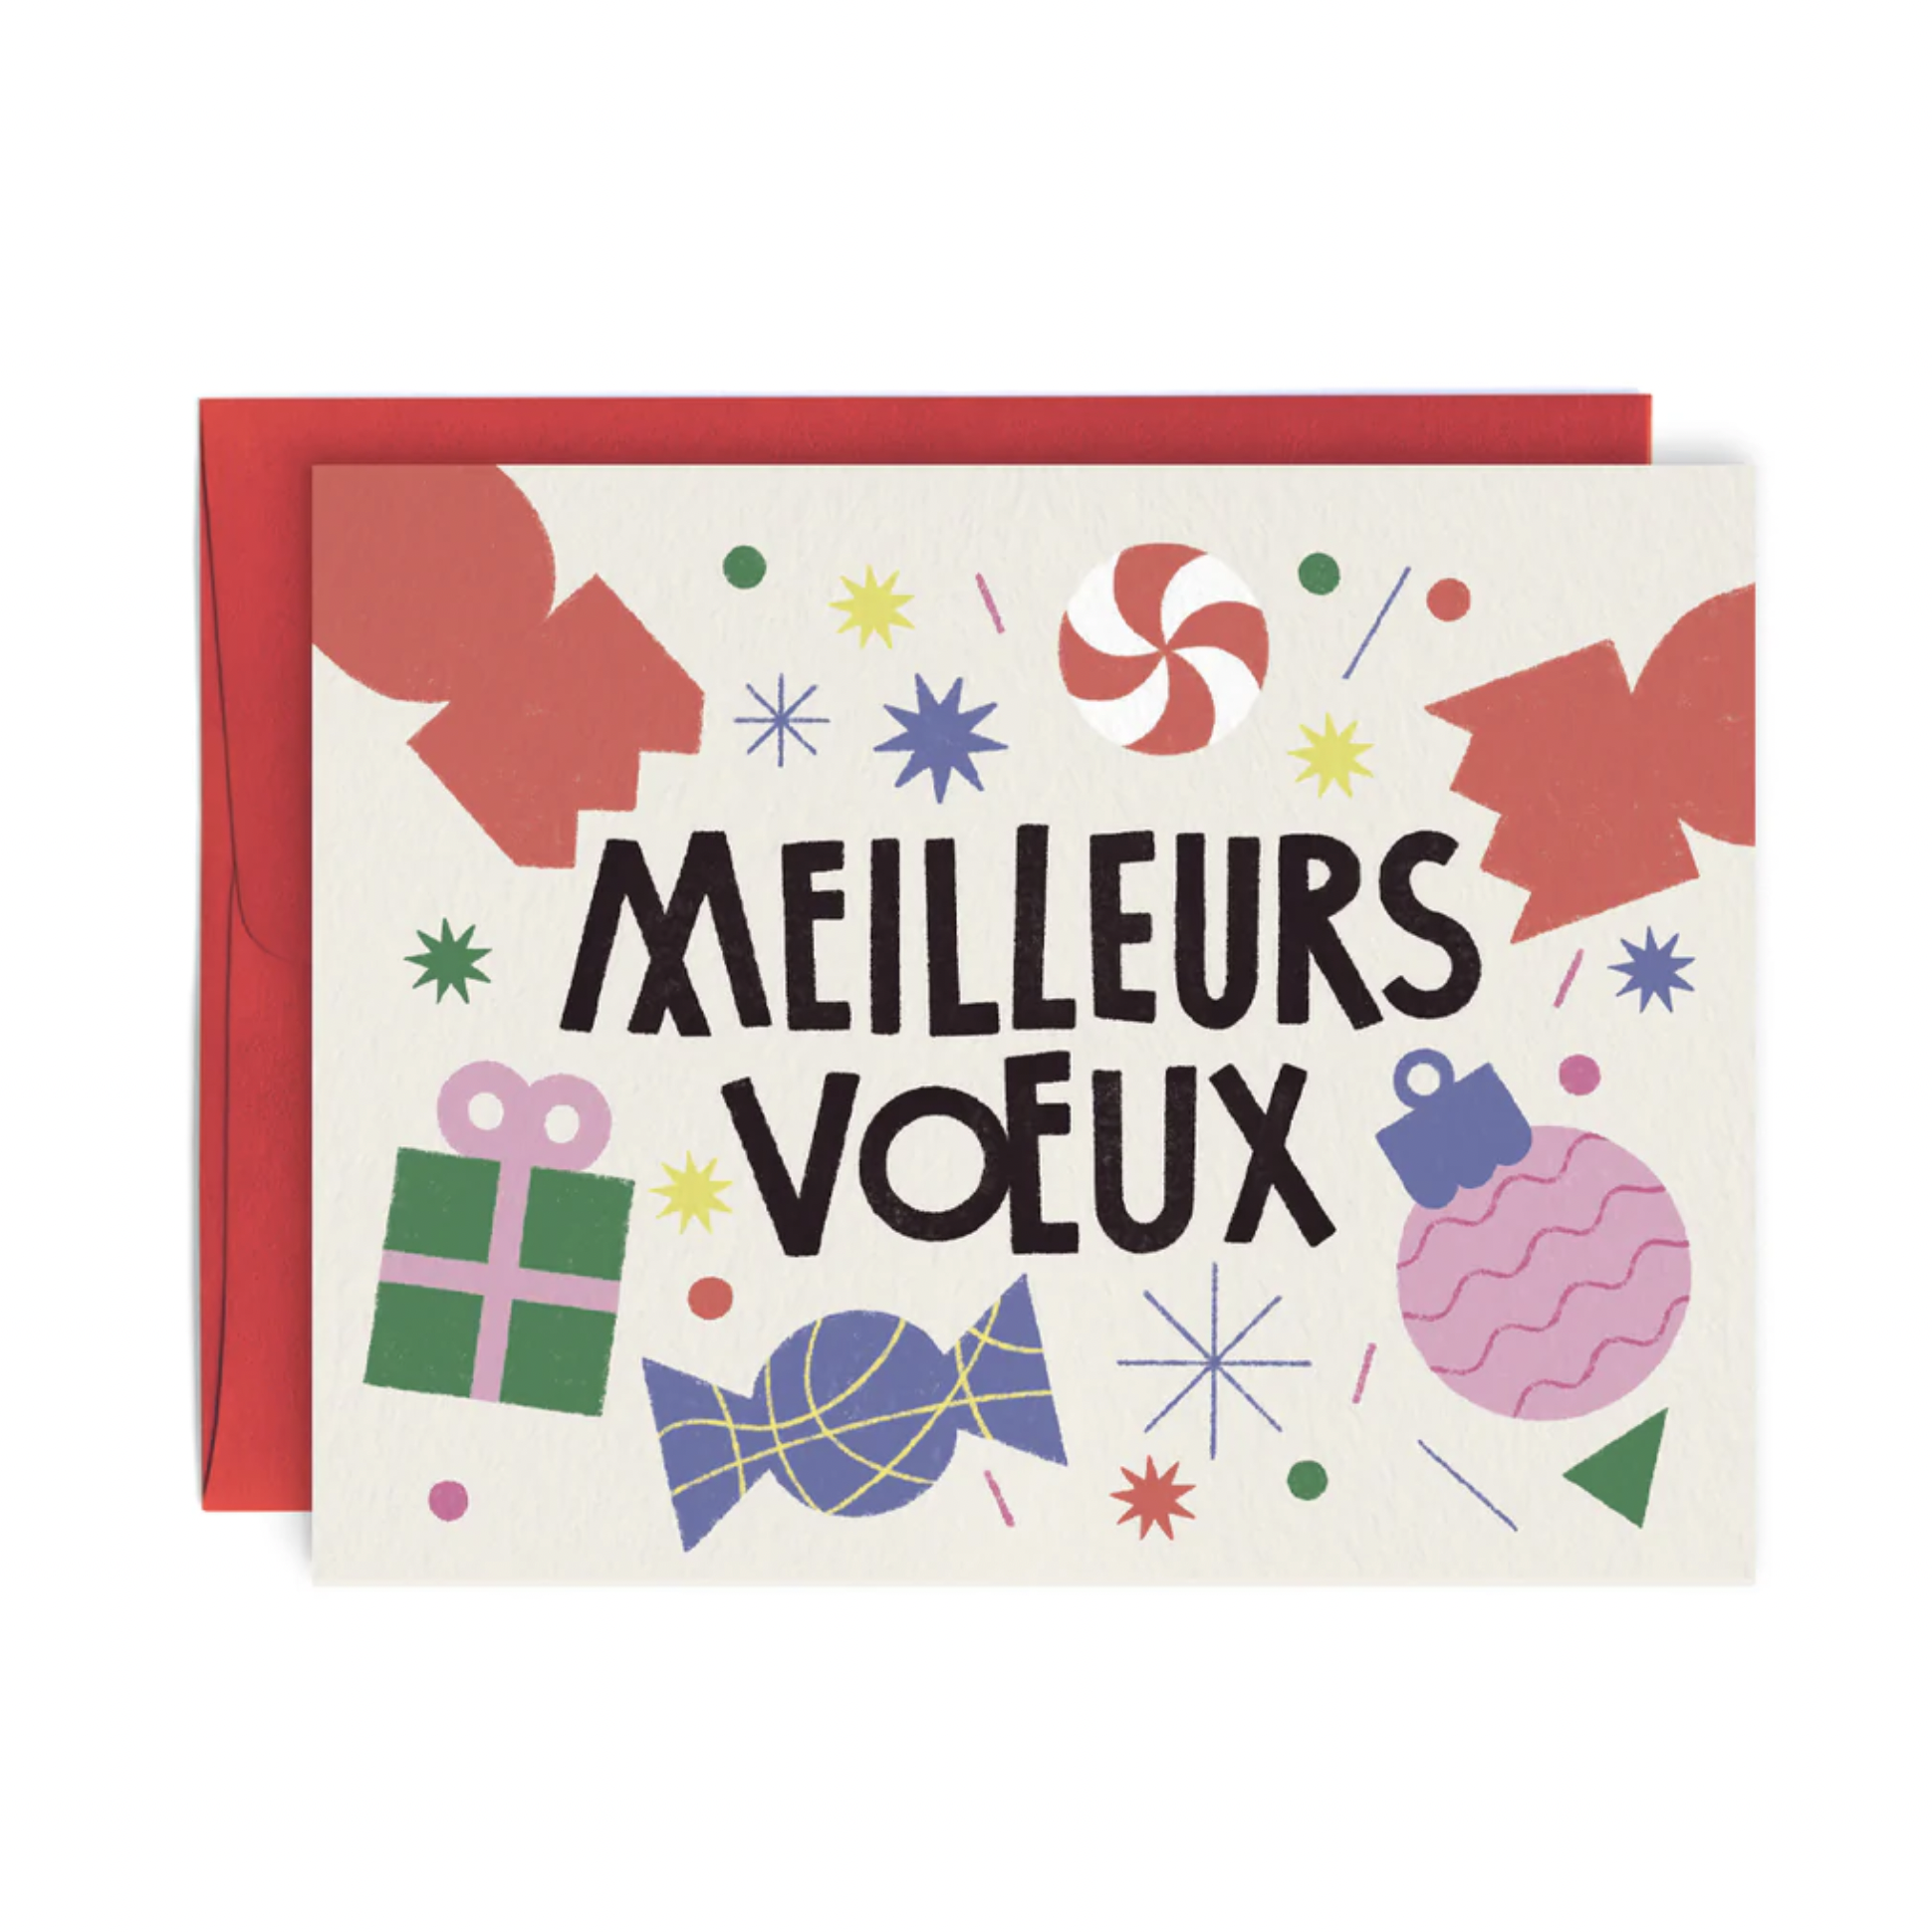 Greeting Card - Meilleurs voeux